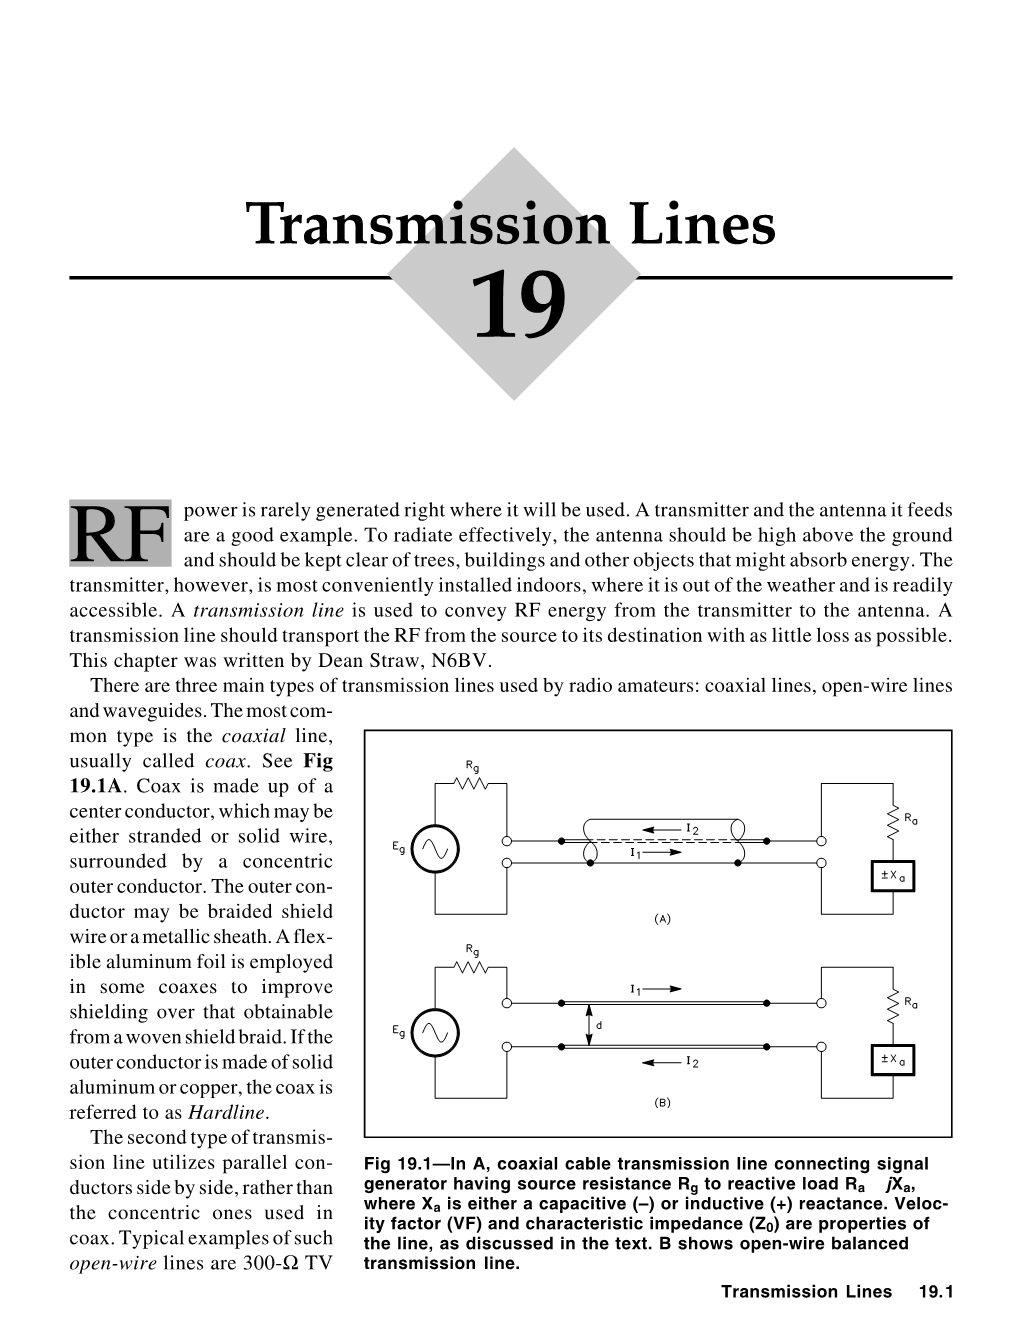 Chapter 19 Table 19.1 Characteristics of Commonly Used Transmission Lines